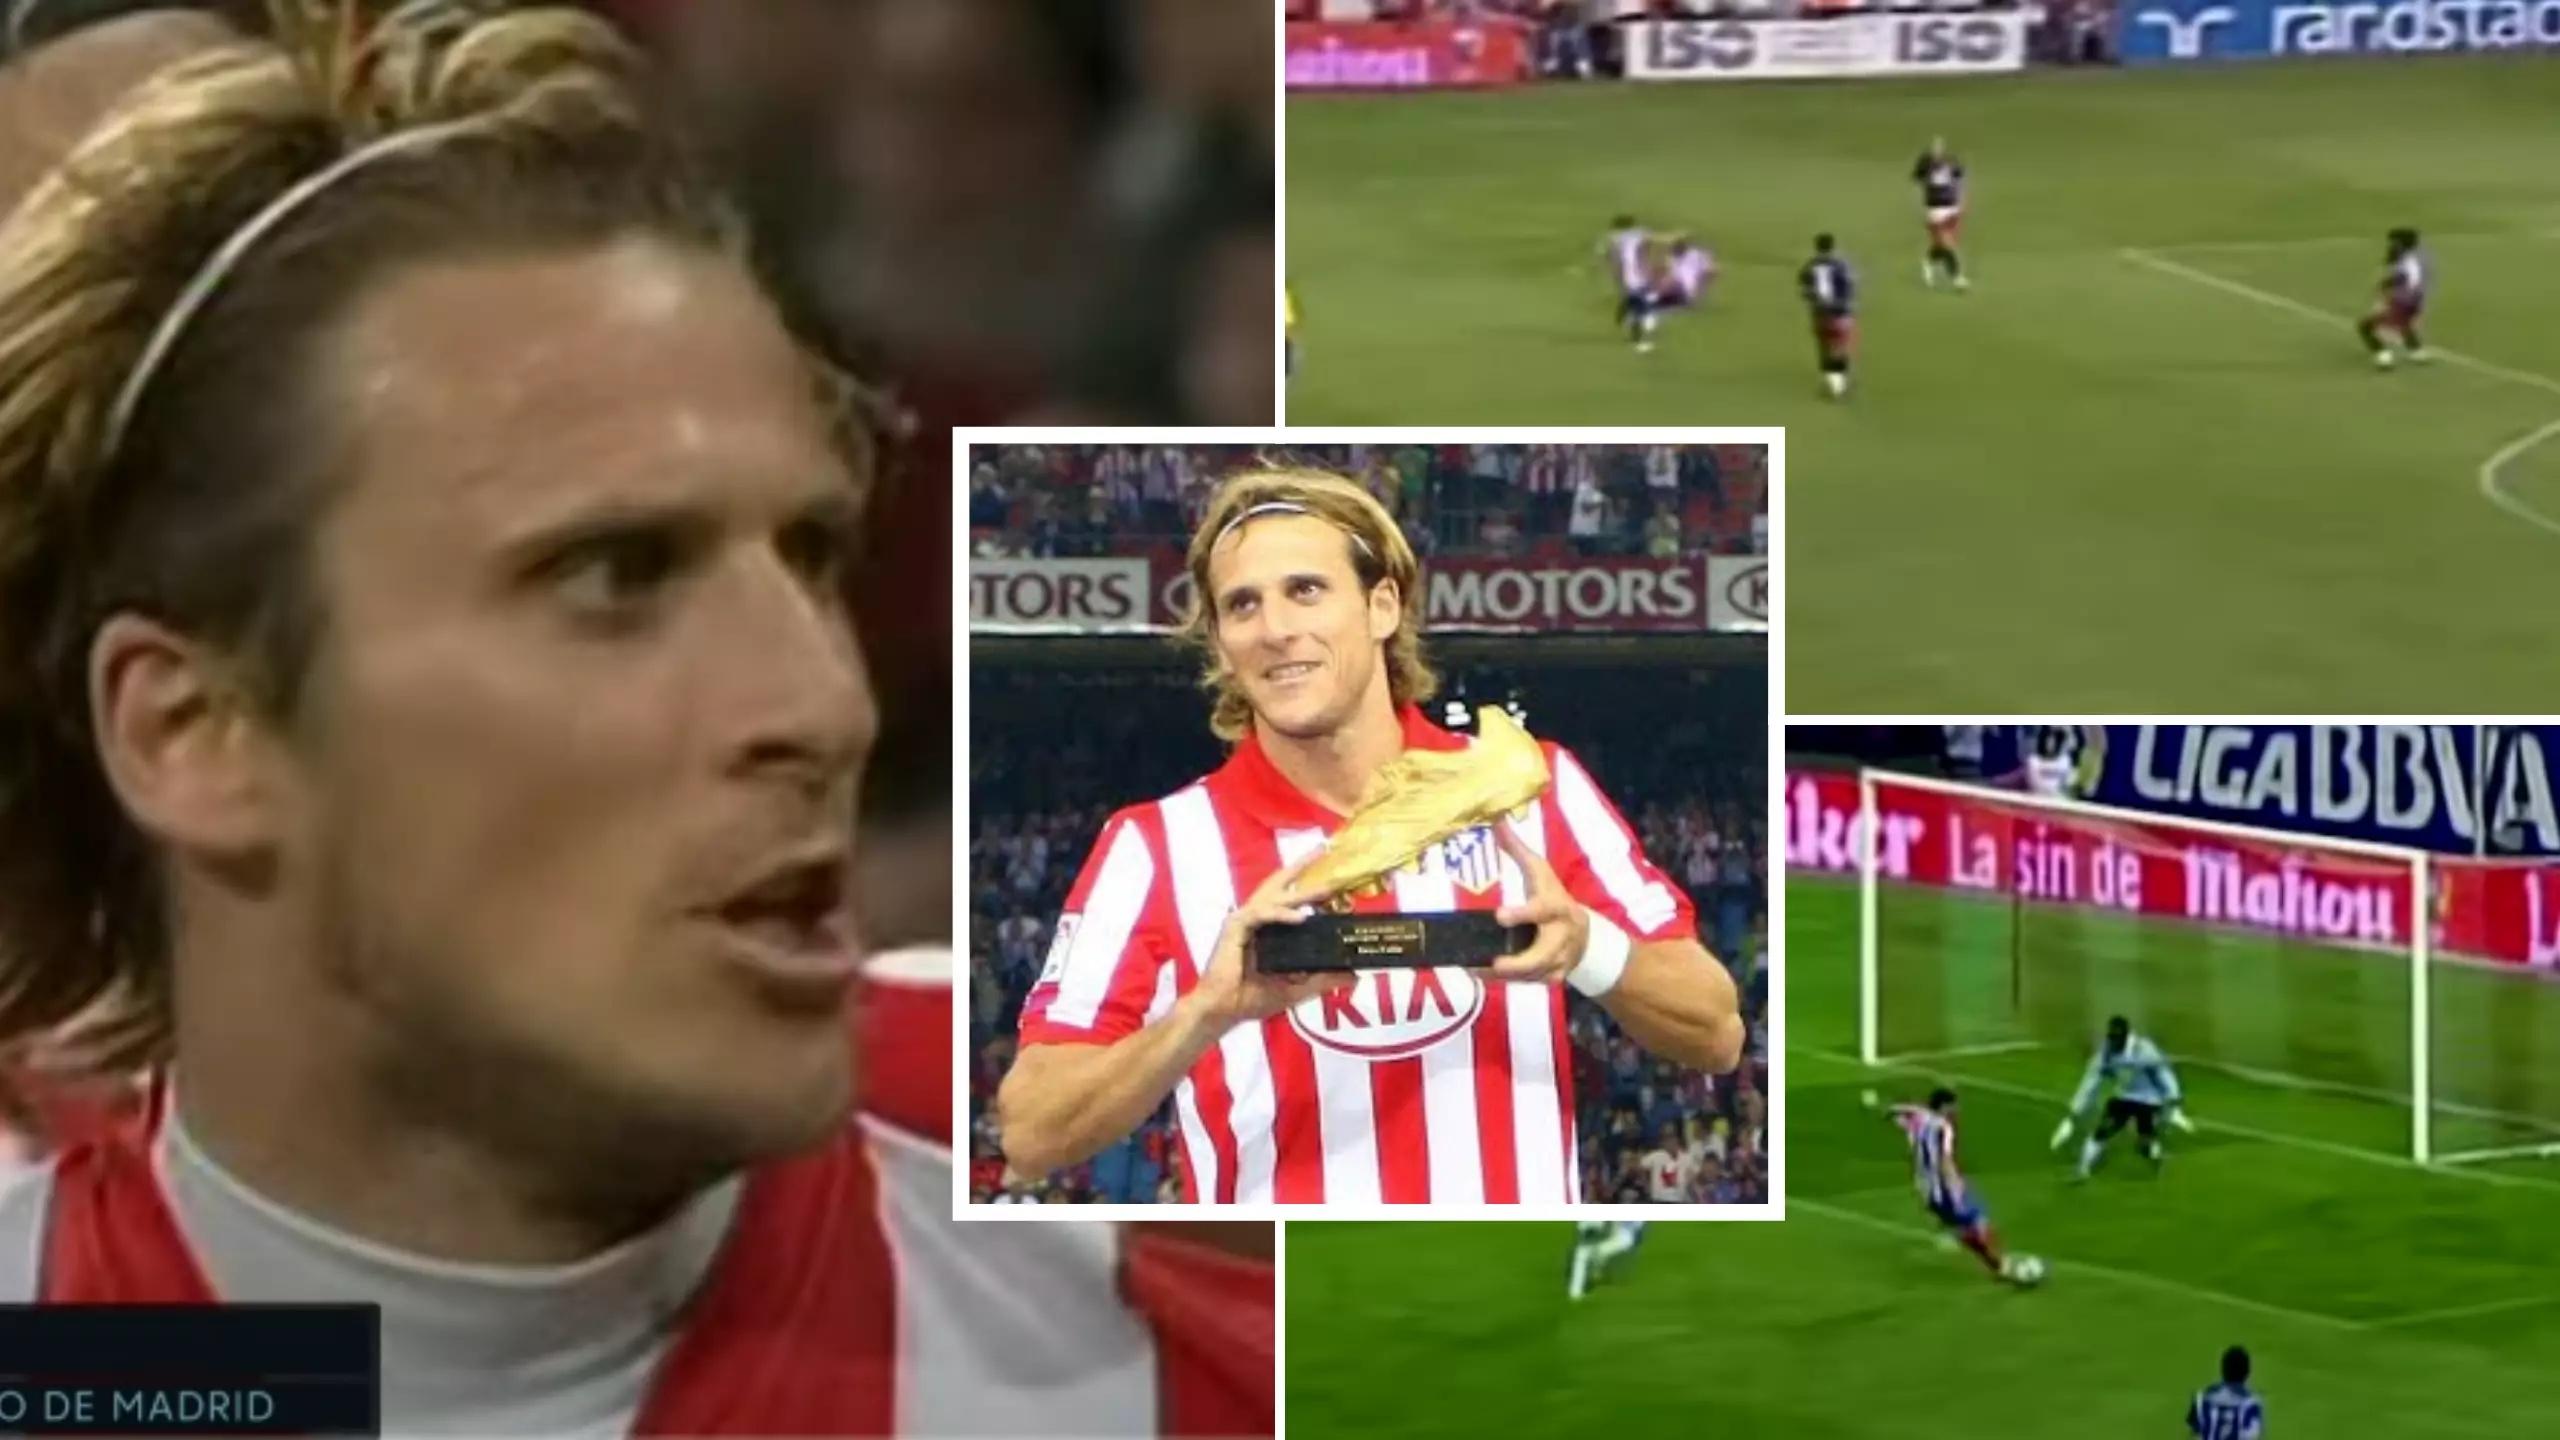 Diego Forlan's 08/09 Season Was Incredibly Underrated, He Became The World's Greatest Striker